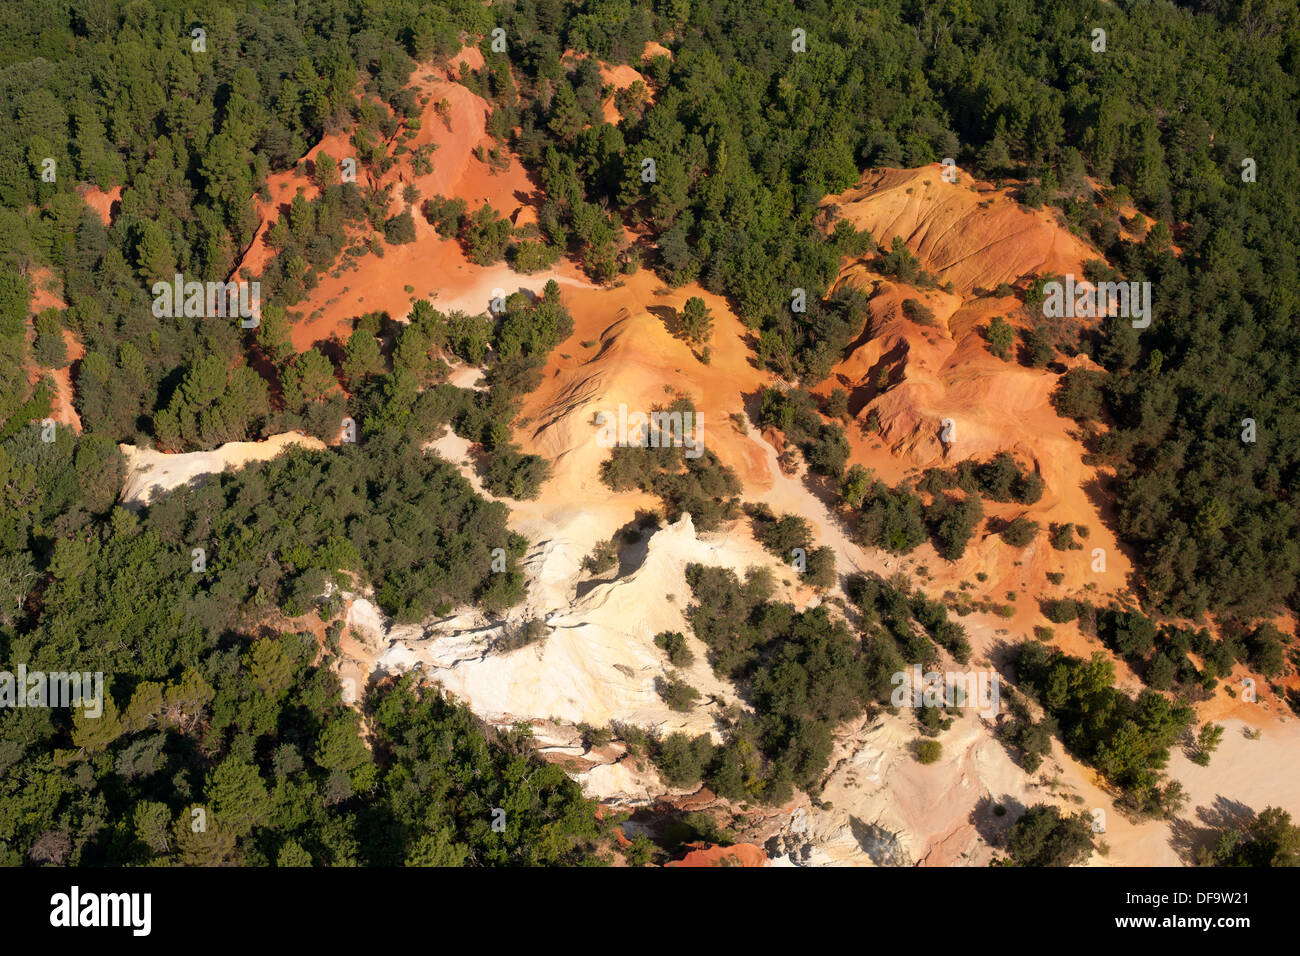 AERIAL VIEW. Quarry of red ocher in sharp contrast with the surrounding green foliage. Rustrel, Lubéron, Vaucluse, Provence, France. Stock Photo